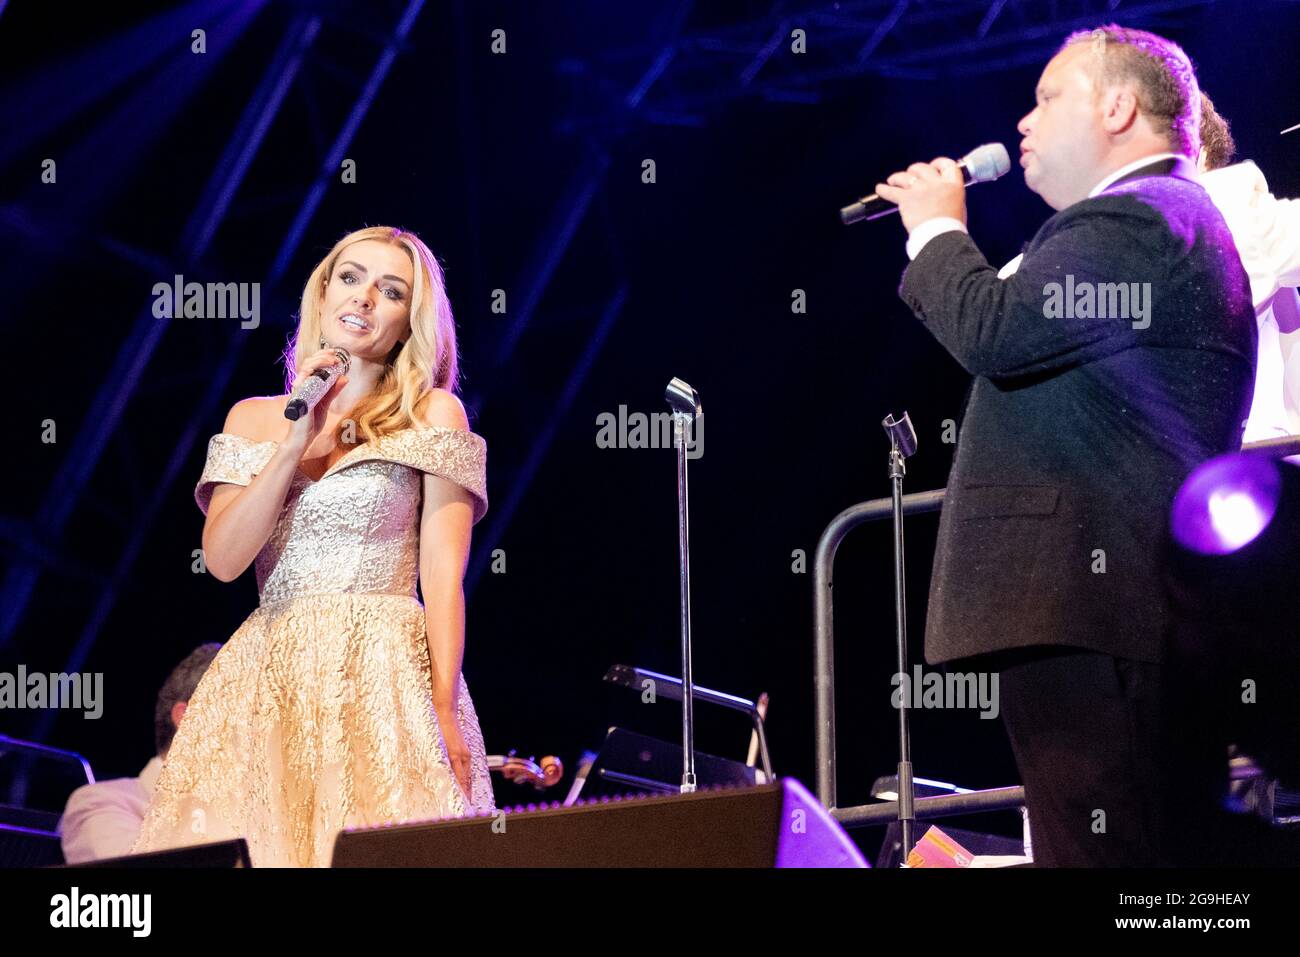 Paul Potts performing on stage in Maldon, Essex, UK with Katherine Jenkins. Welsh male operatic singer singing with the London Concert Orchestra Stock Photo